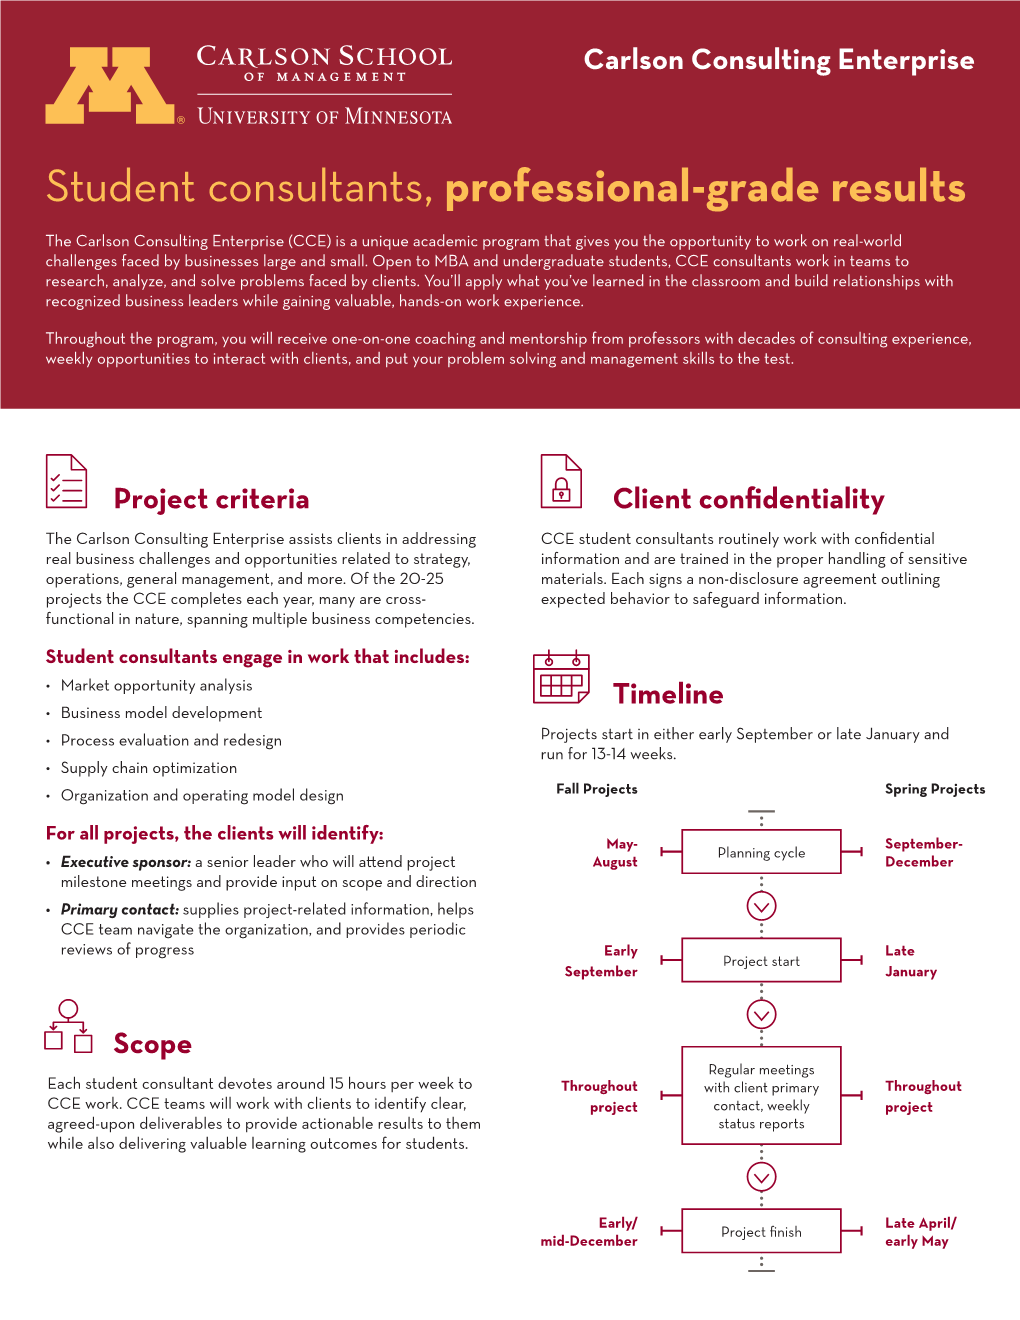 Student Consultants, Professional-Grade Results